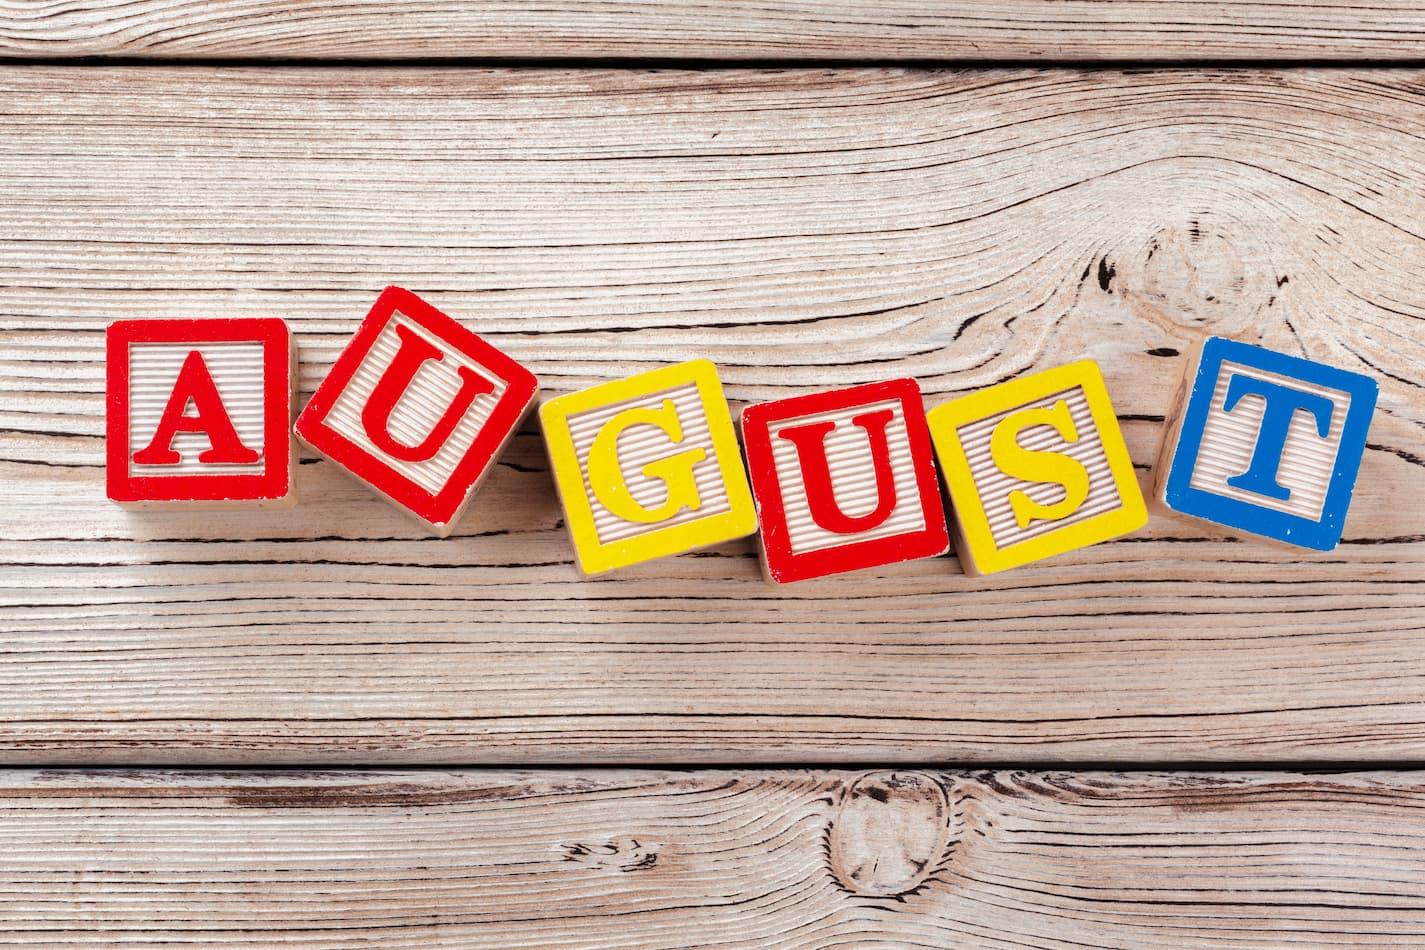 Image of blocks spelling out August on a wooden background